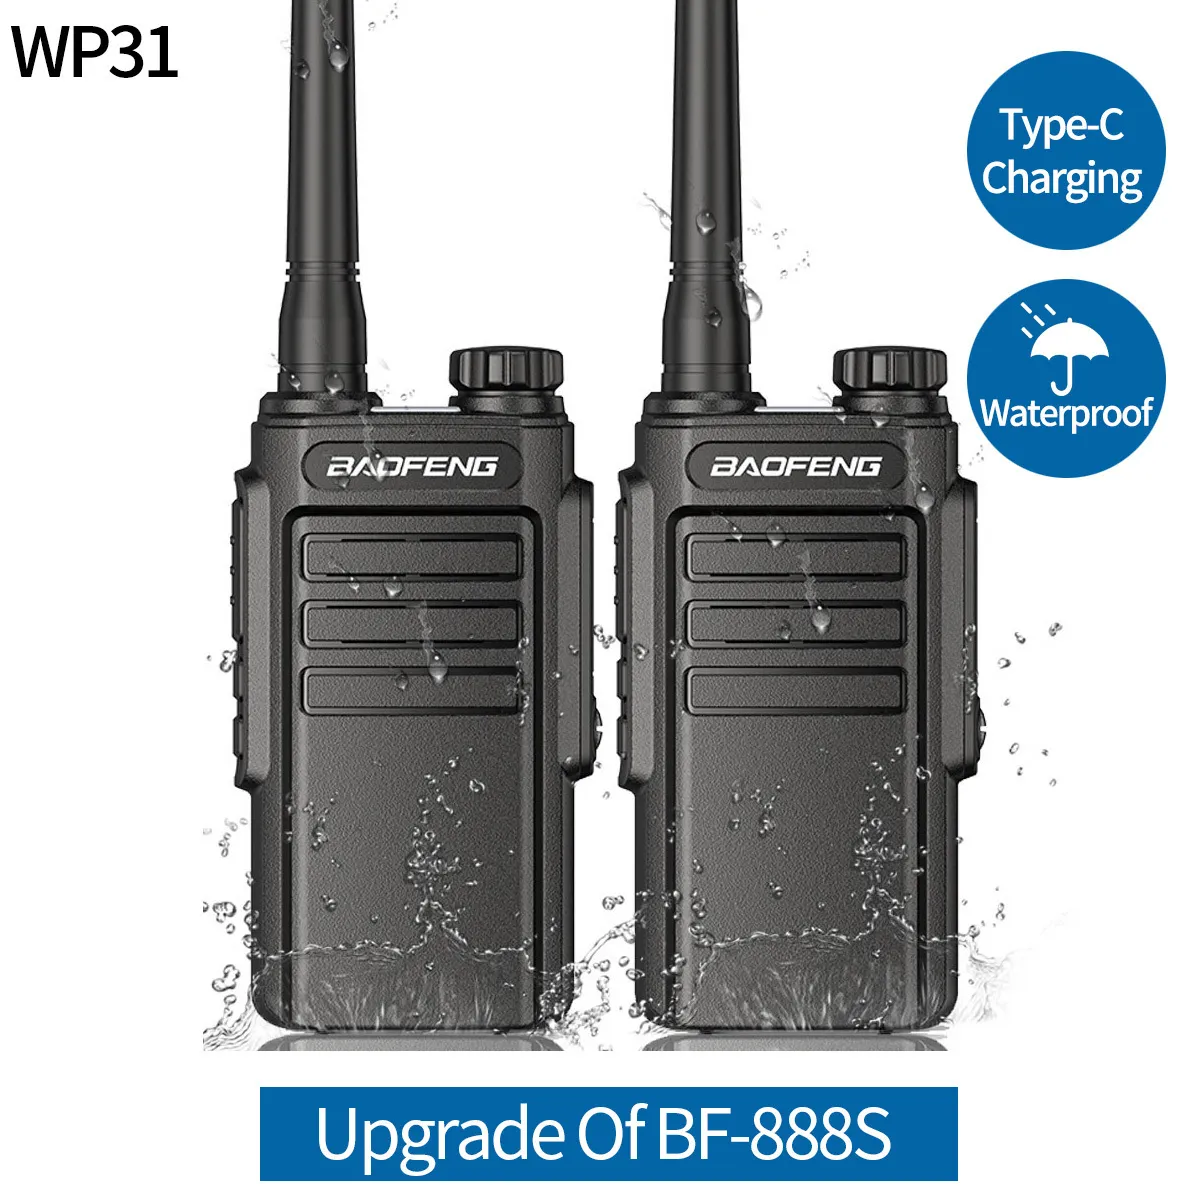 1/2Pack Baofeng BF-888S walkie talkie 888s UHF 400-470MHz 16Channel  Portable two way radio with earpiece bf-888s transceiver T20